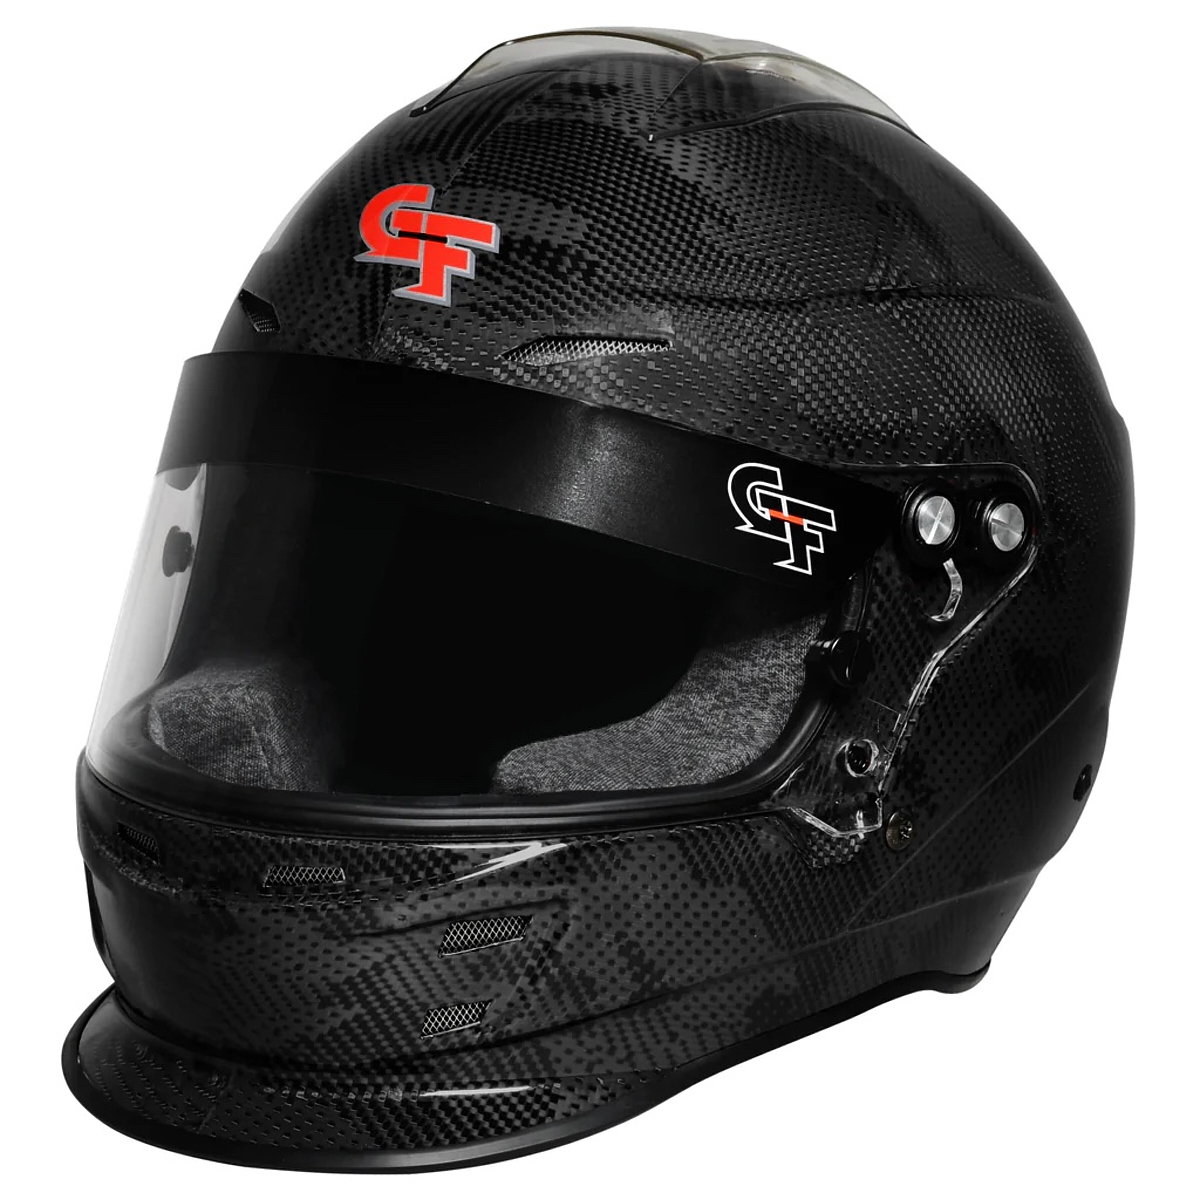 G-Force Racing Gear 16005XLGBK Helmet, Nova Fusion, Full Face, Snell SA 2020, Head and Neck Support Ready, Black, X-Large, Each